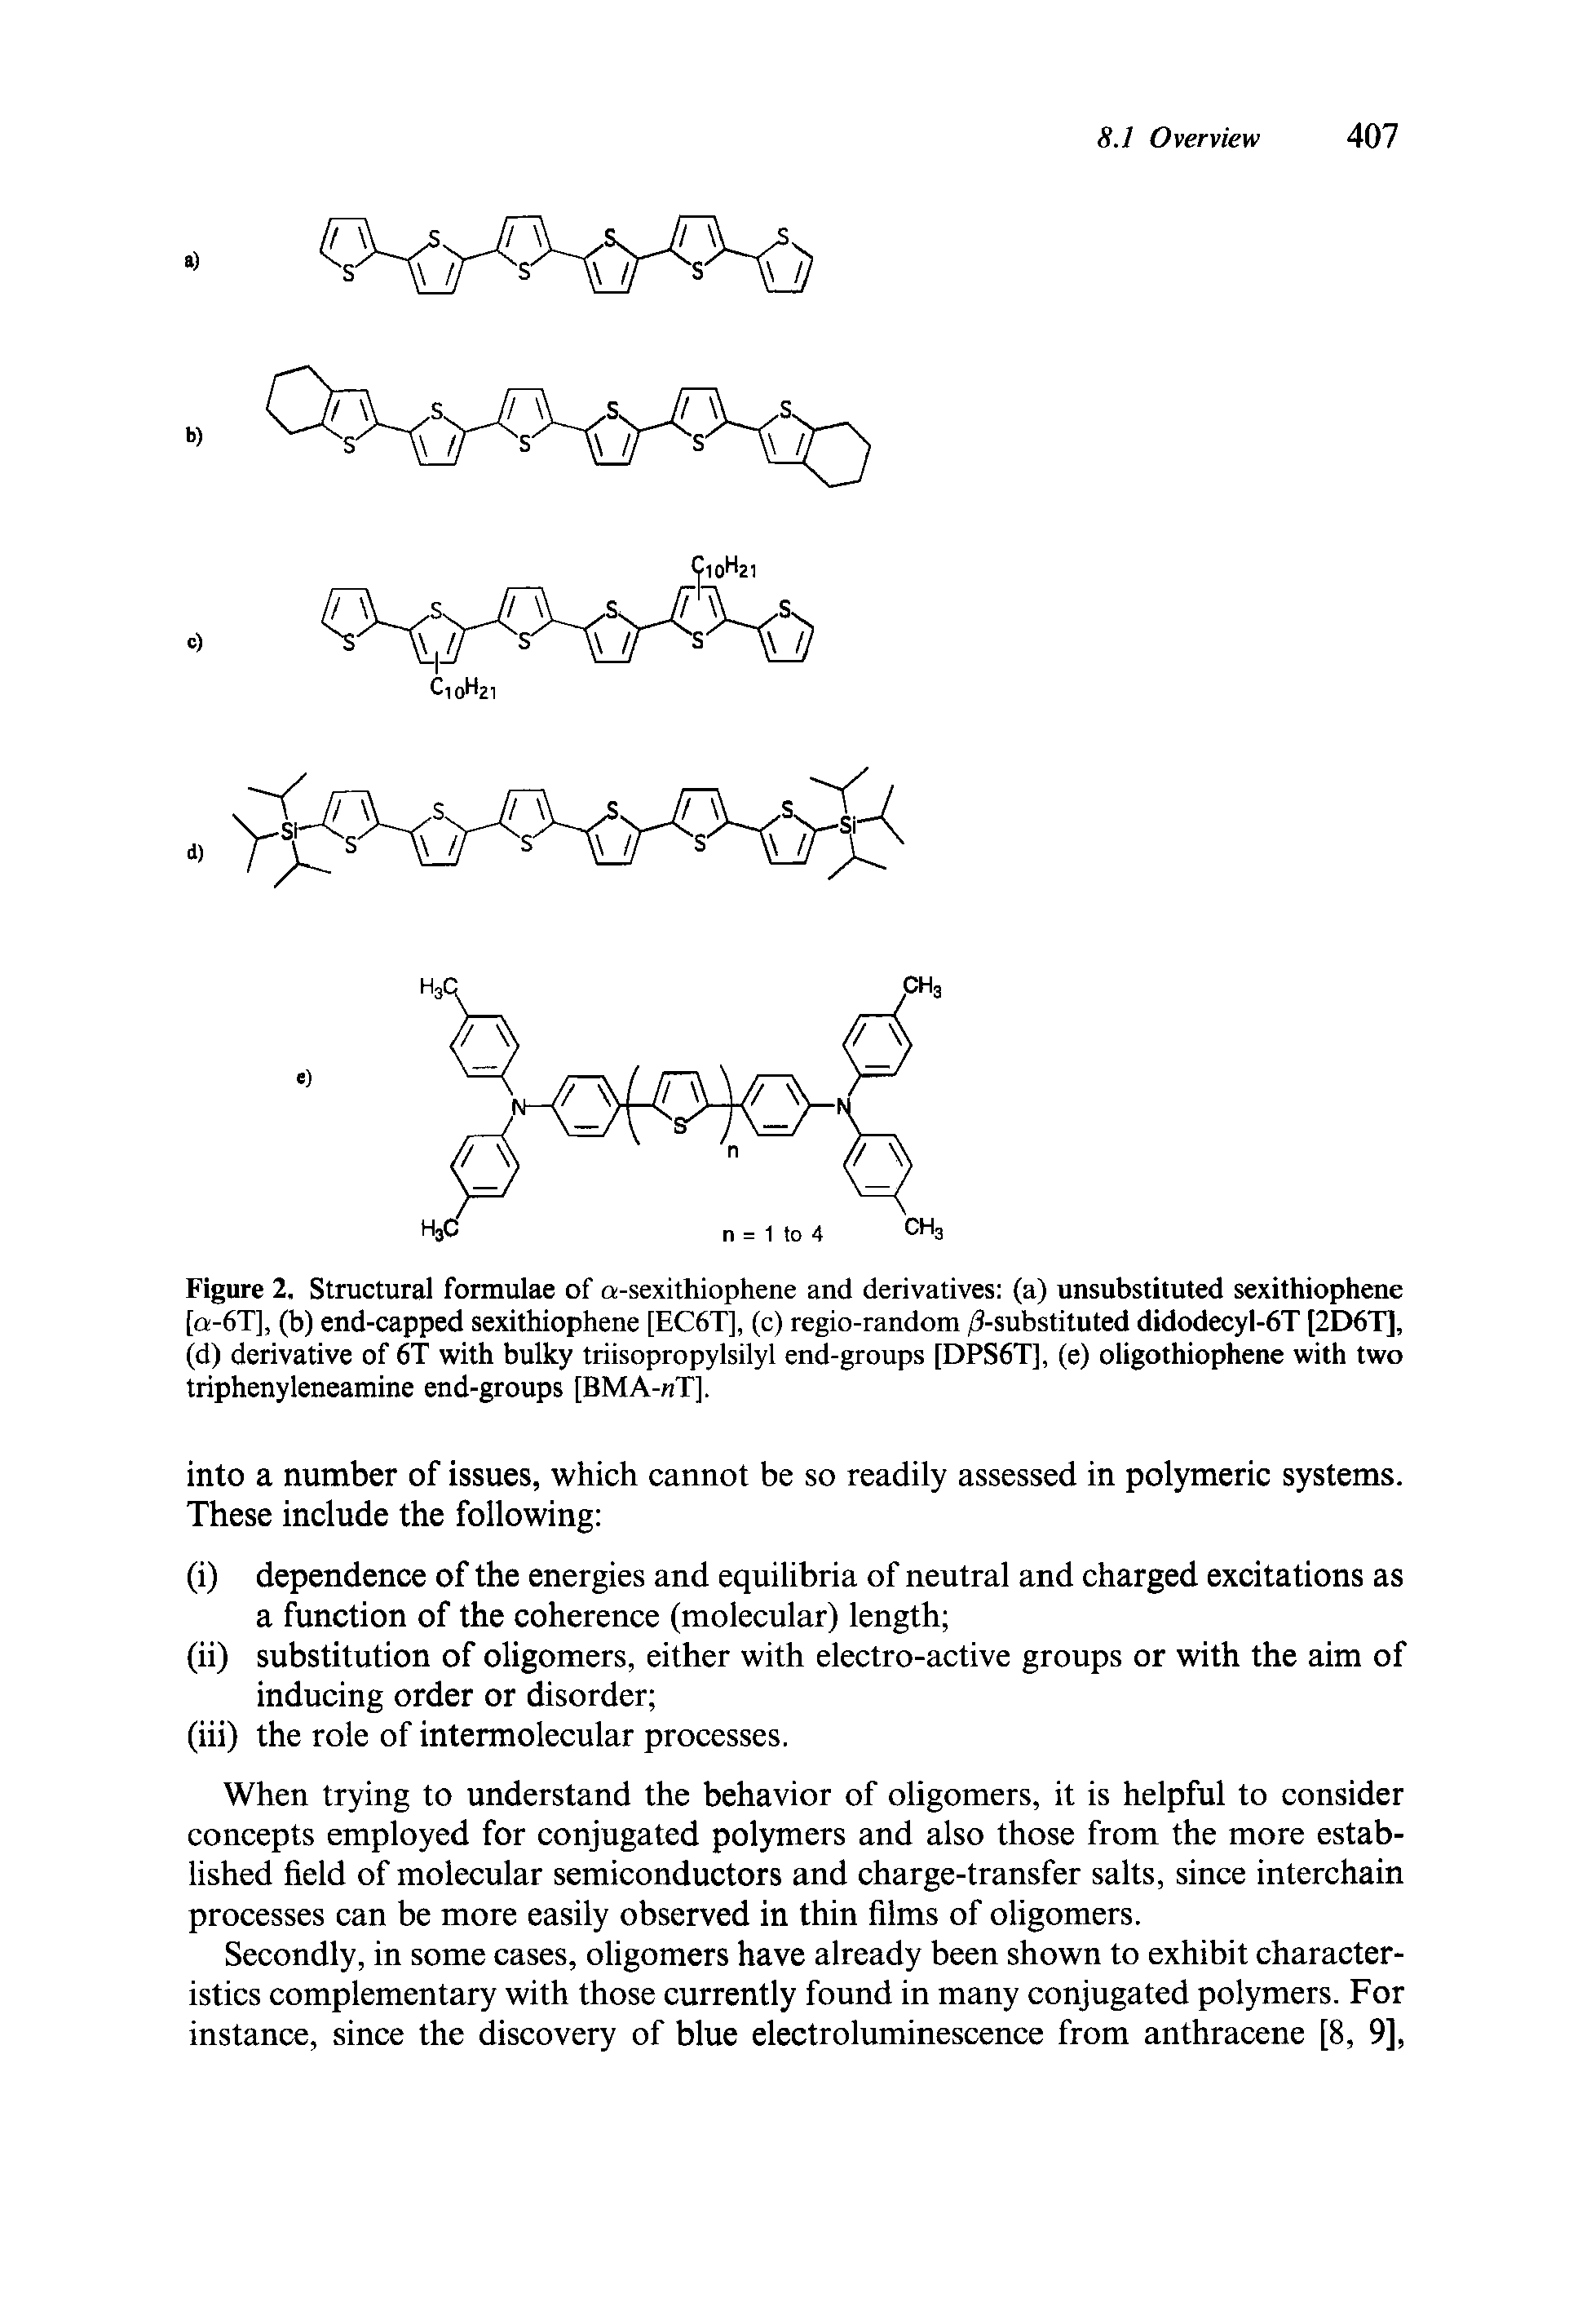 Figure 2. Structural formulae of a-sexithiophene and derivatives (a) unsubstituted sexithiophene [a-6T], (b) end-capped sexithiophene [EC6T], (c) regio-random /3-substituted didodecyl-6T (2D6T], (d) derivative of 6T with bulky triisopropylsilyl end-groups [DPS6T], (e) oligothiophene with two triphenyleneamine end-groups [BMA-nT],...